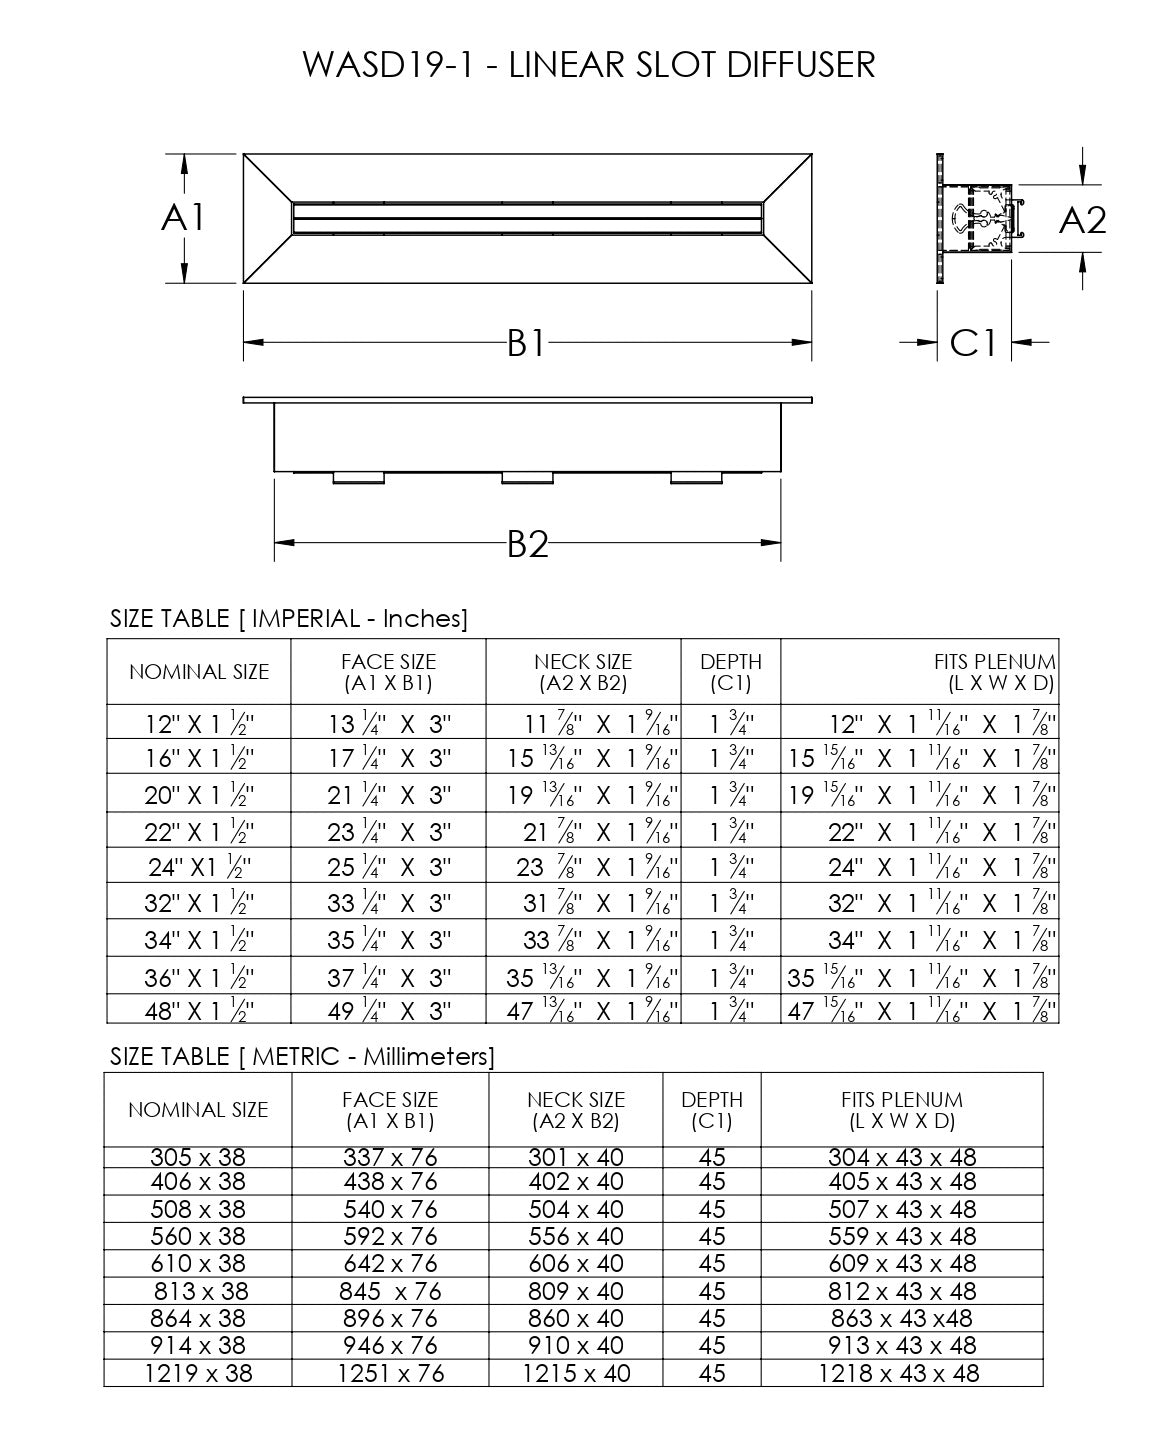 Linear slot diffusers 19-1 size chart